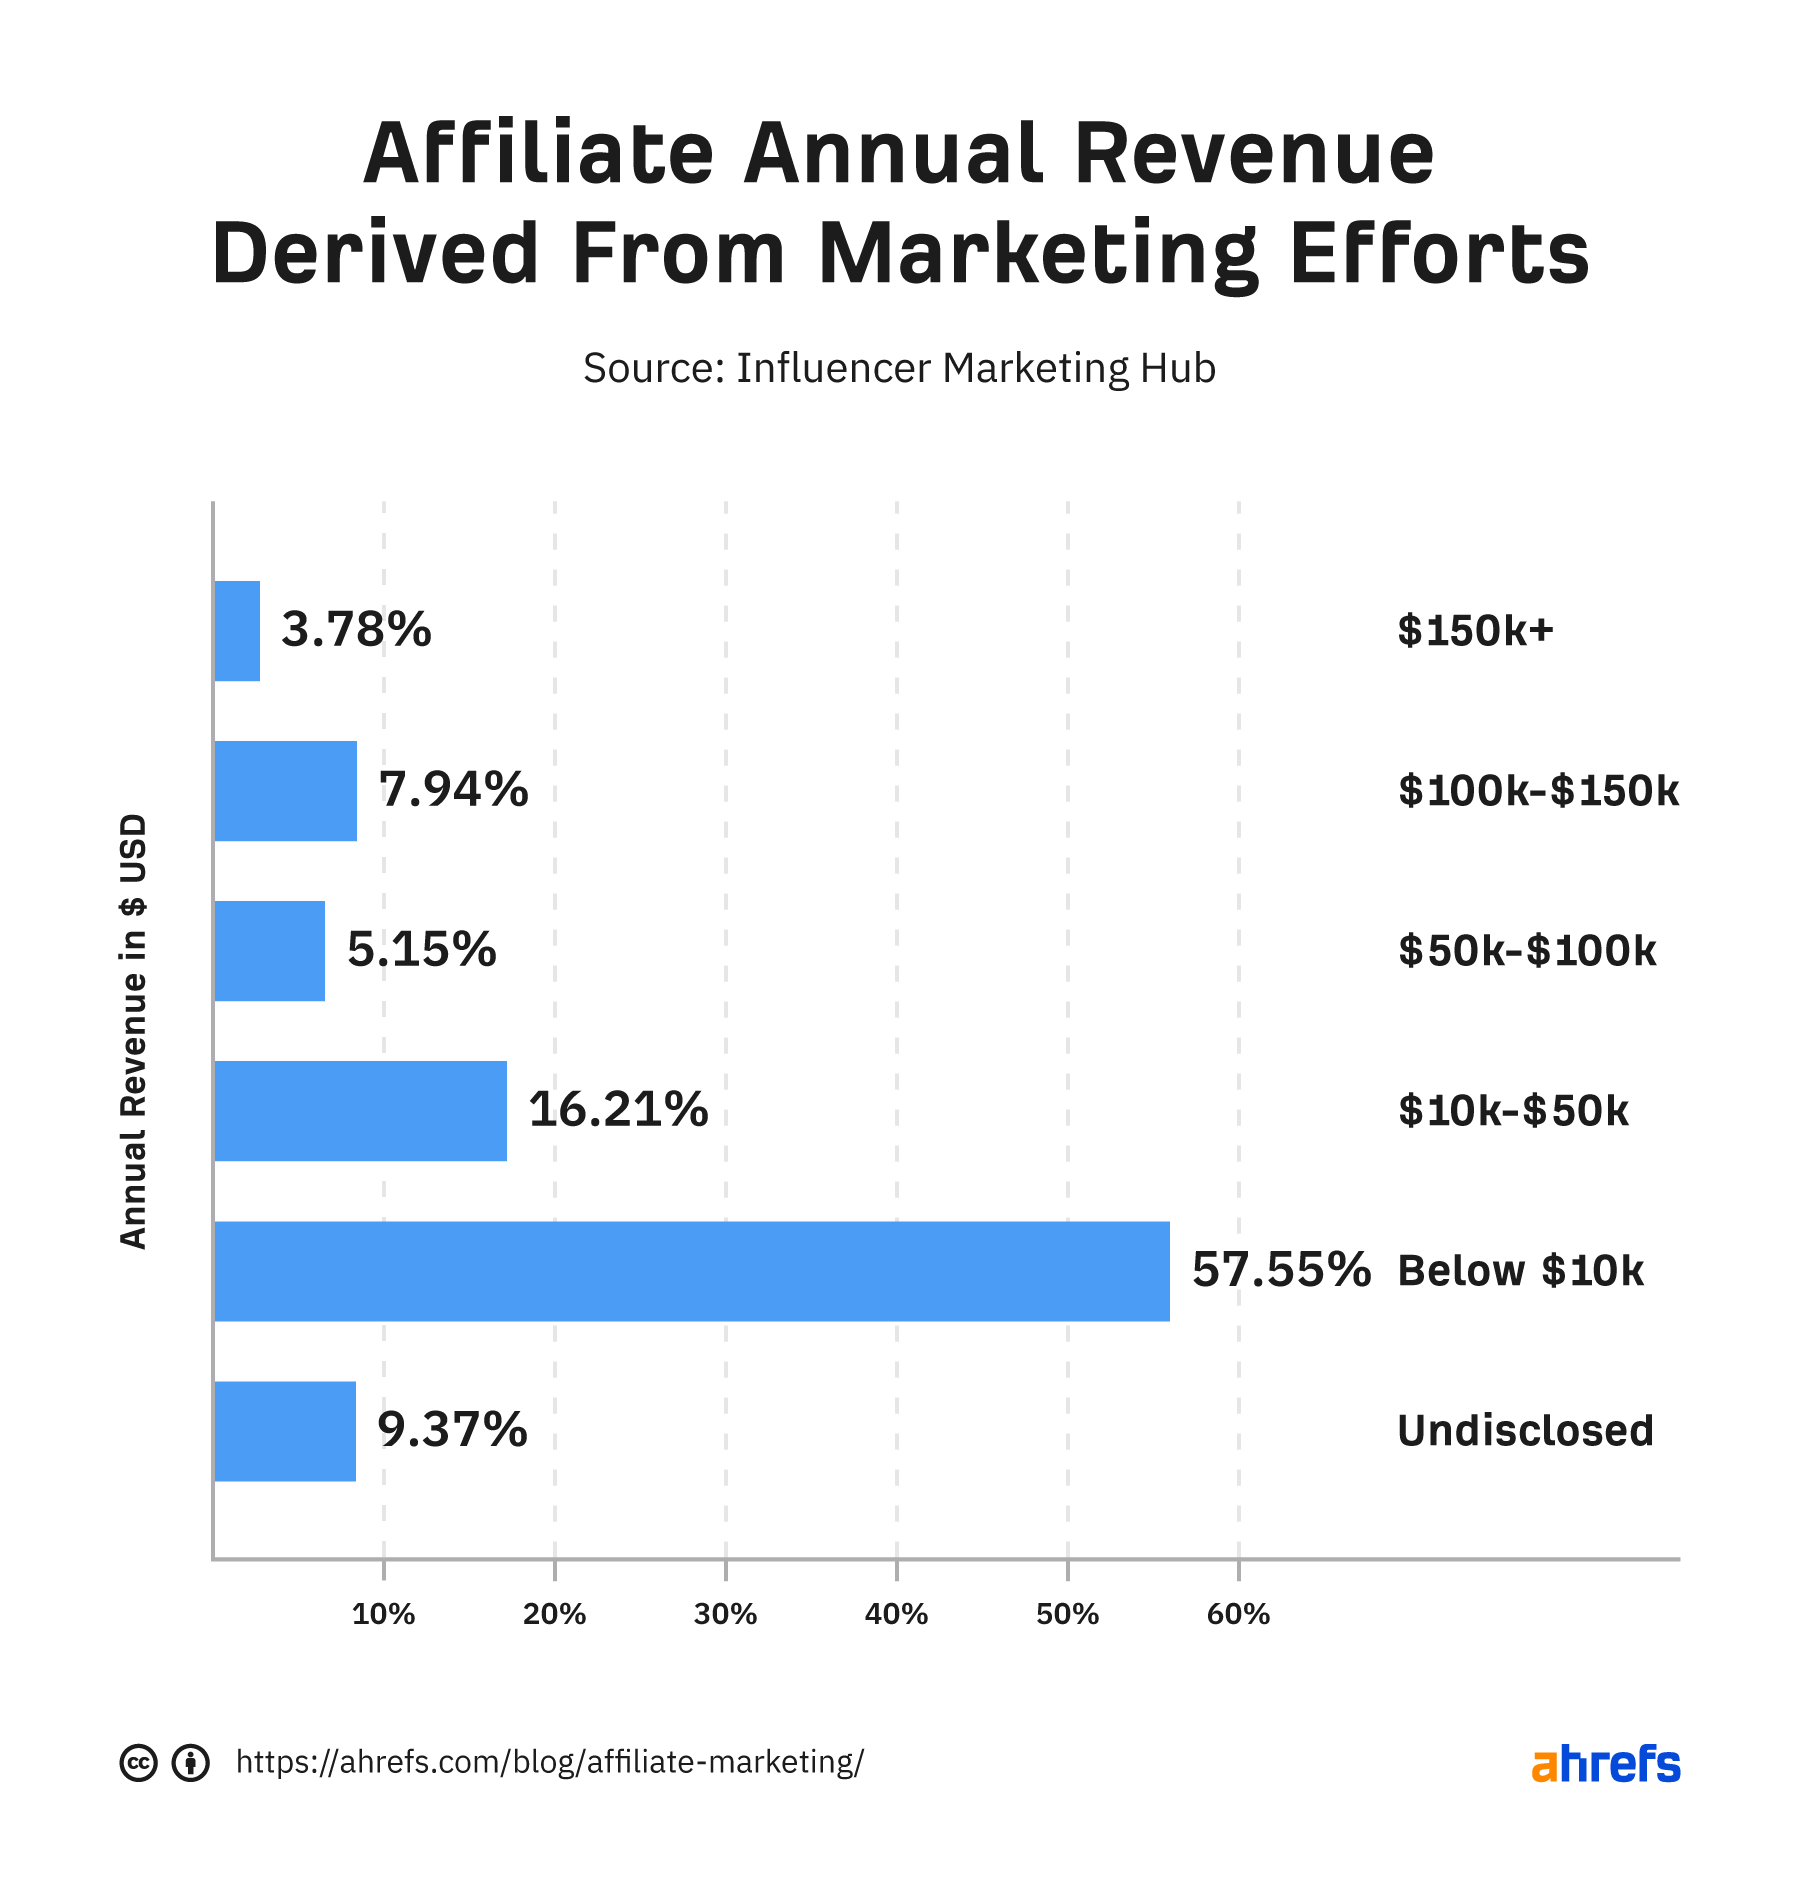 Affiliate annual revenue derived from marketing efforts